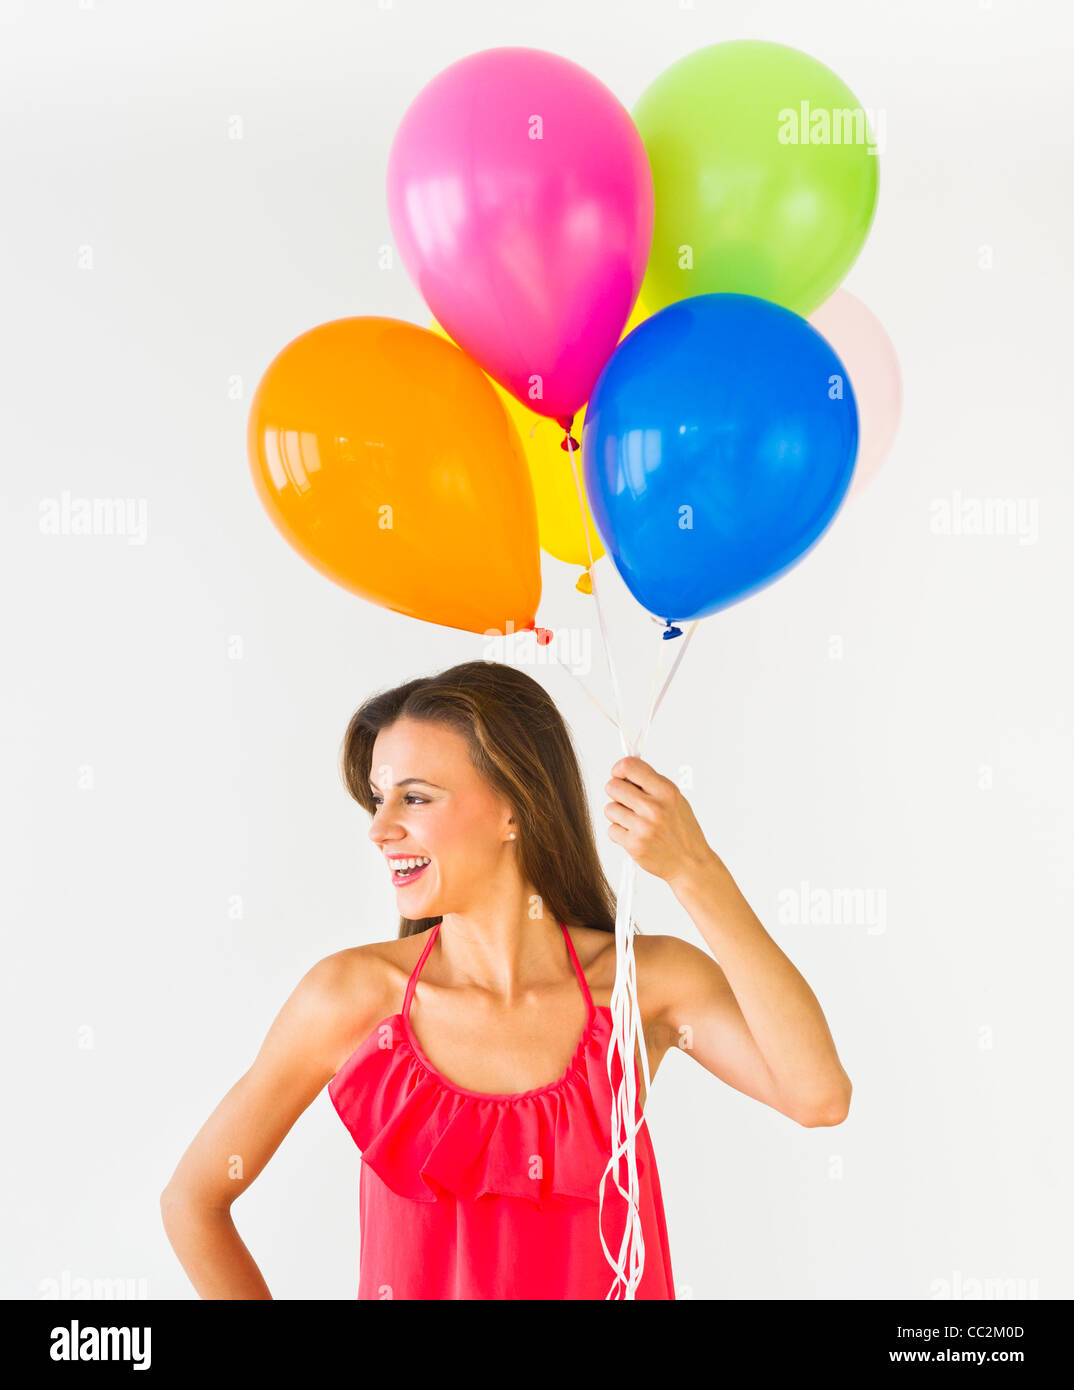 Smiling woman holding balloons, studio shot Banque D'Images